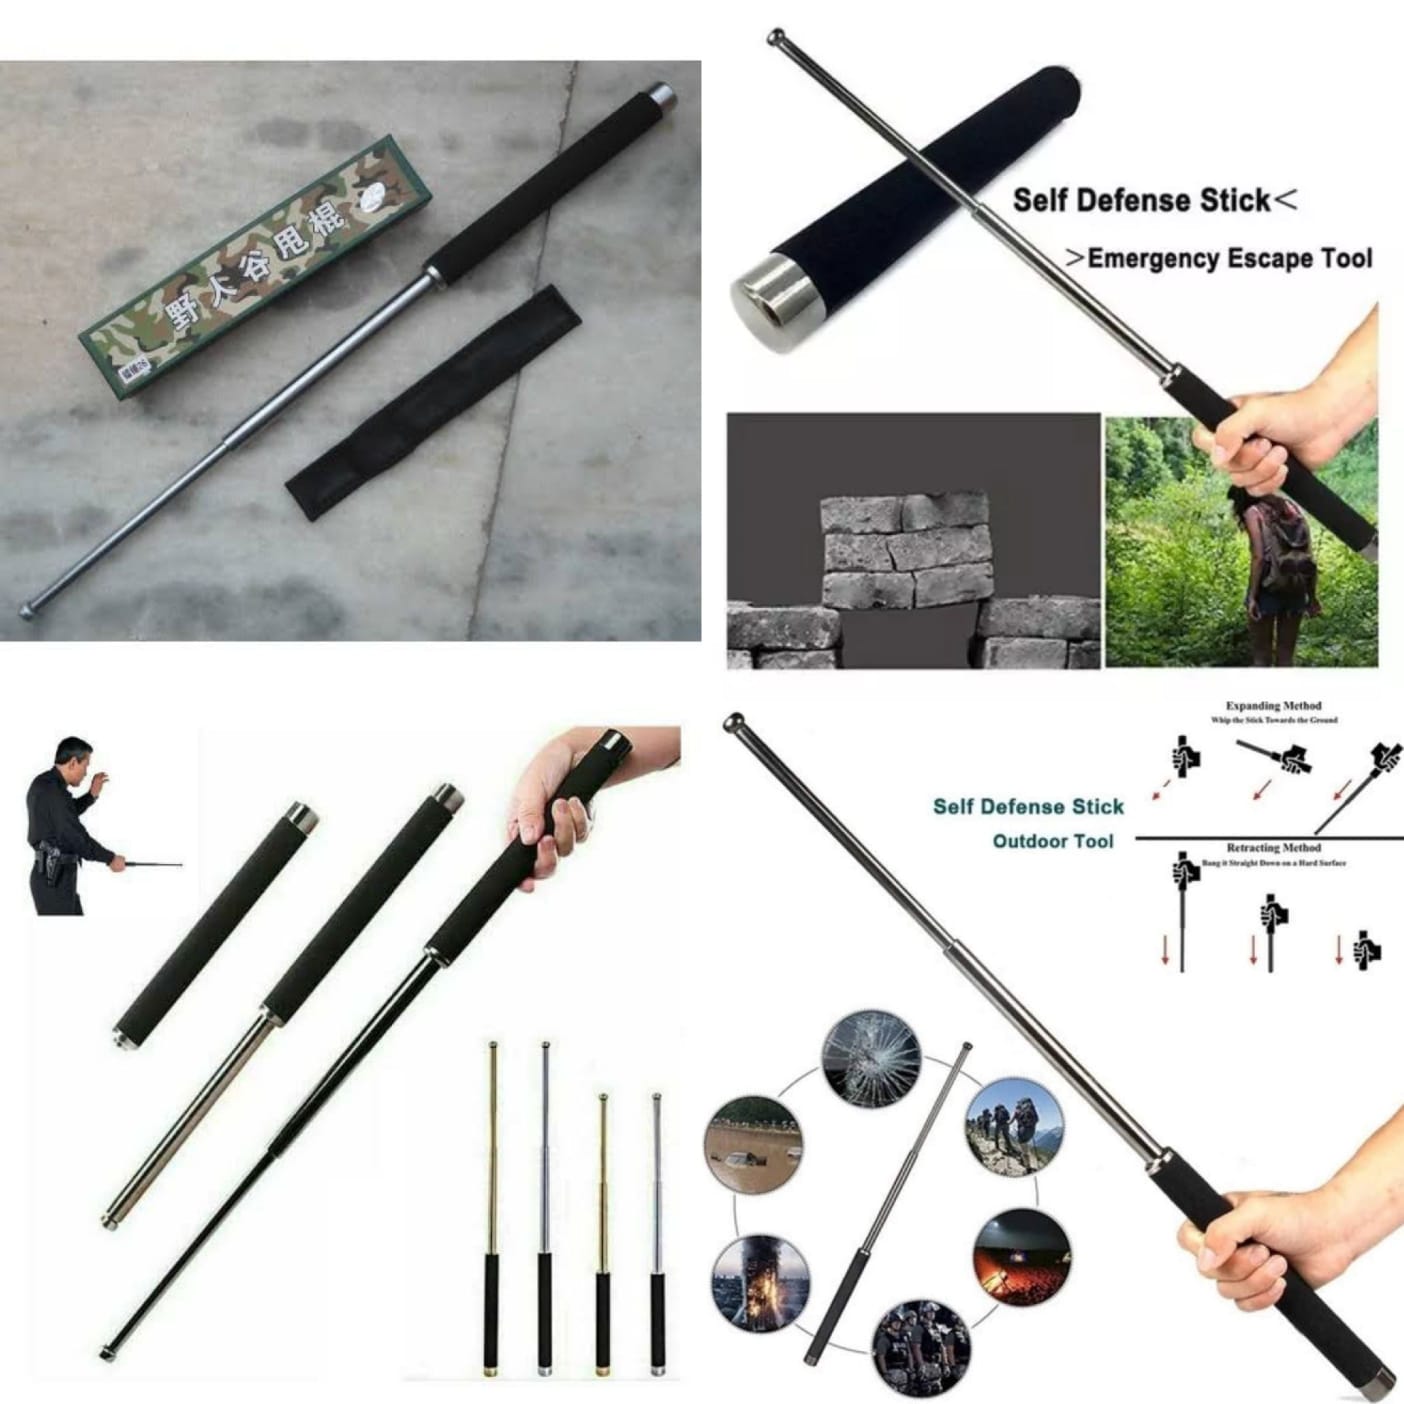 Expandable Multi Utility Telescopic Foldable Self Defence Stick - with Nylon Bag Cover and Comfotable Grip